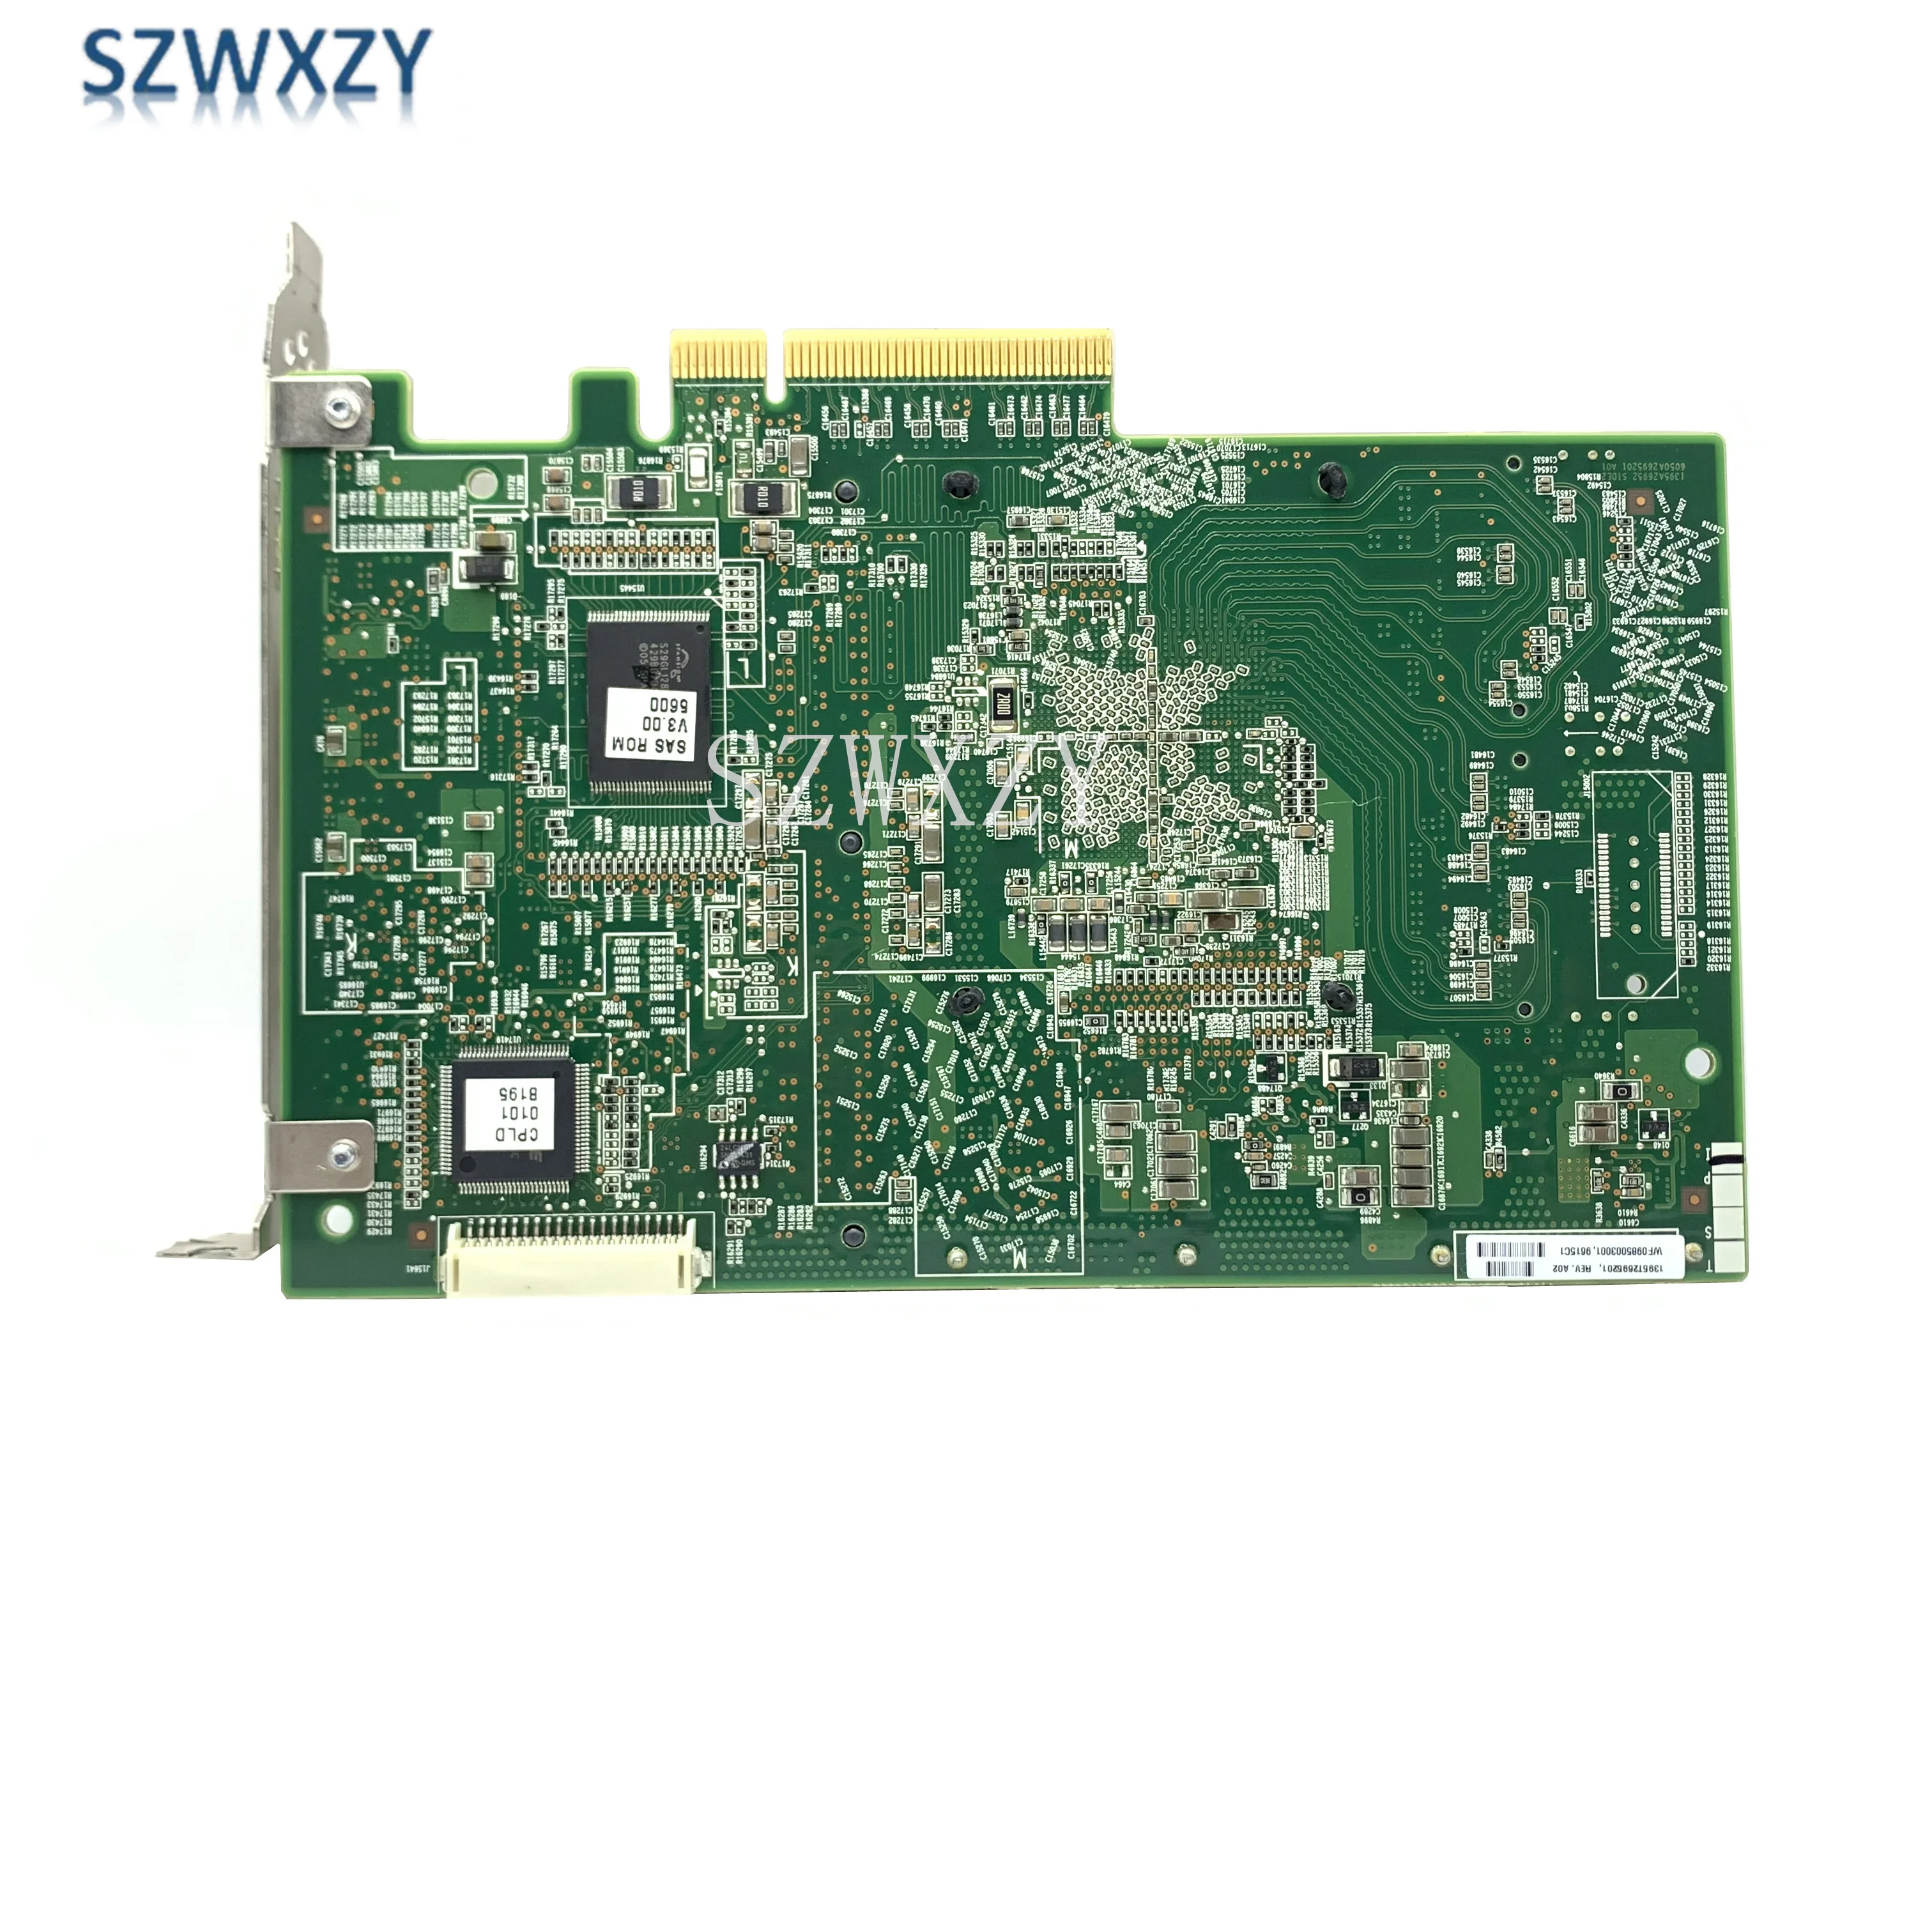 SZWXZY For HP P840 12Gb SAS 761880-001+4G Array Card 726897-B21 100% Tested  Fast Shipping